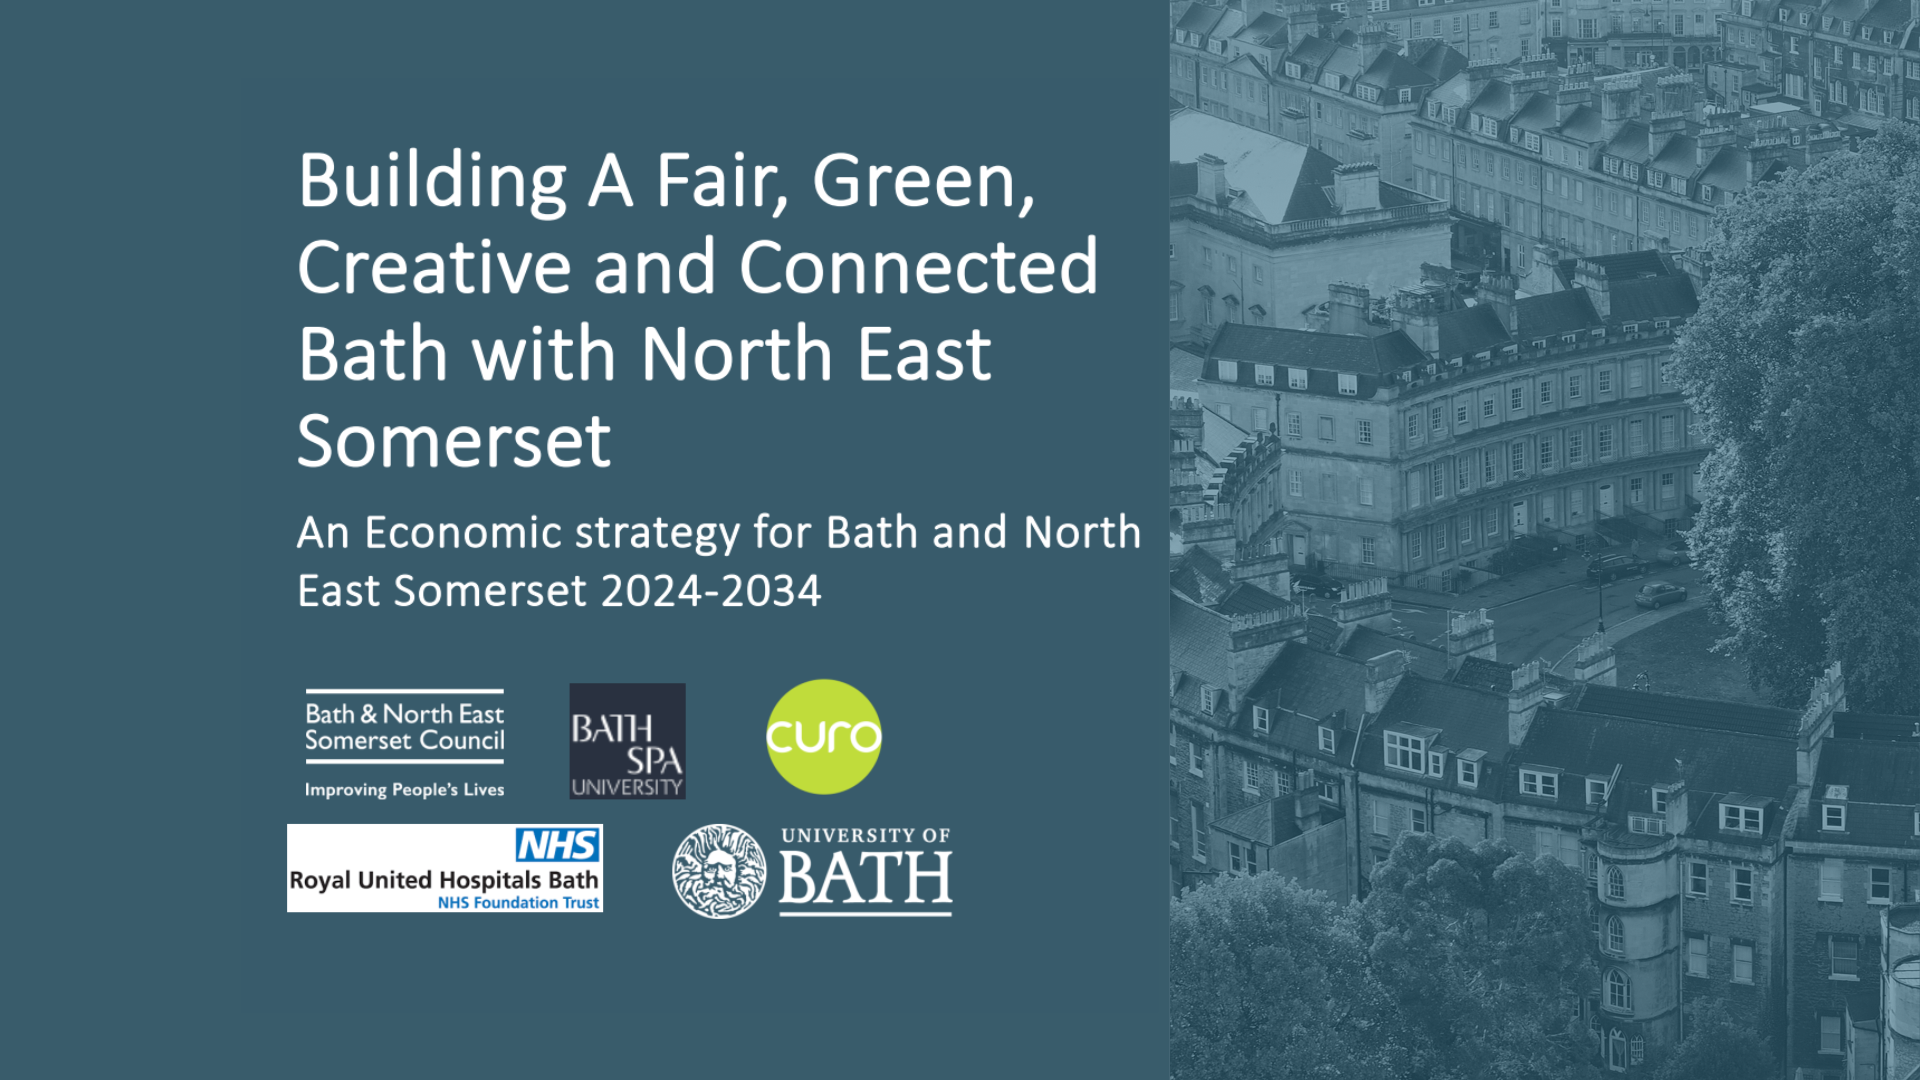 Front cover shows Bath rooftops and the title Building a Fair, Green and Connected Bath with North East Somerset Economy.